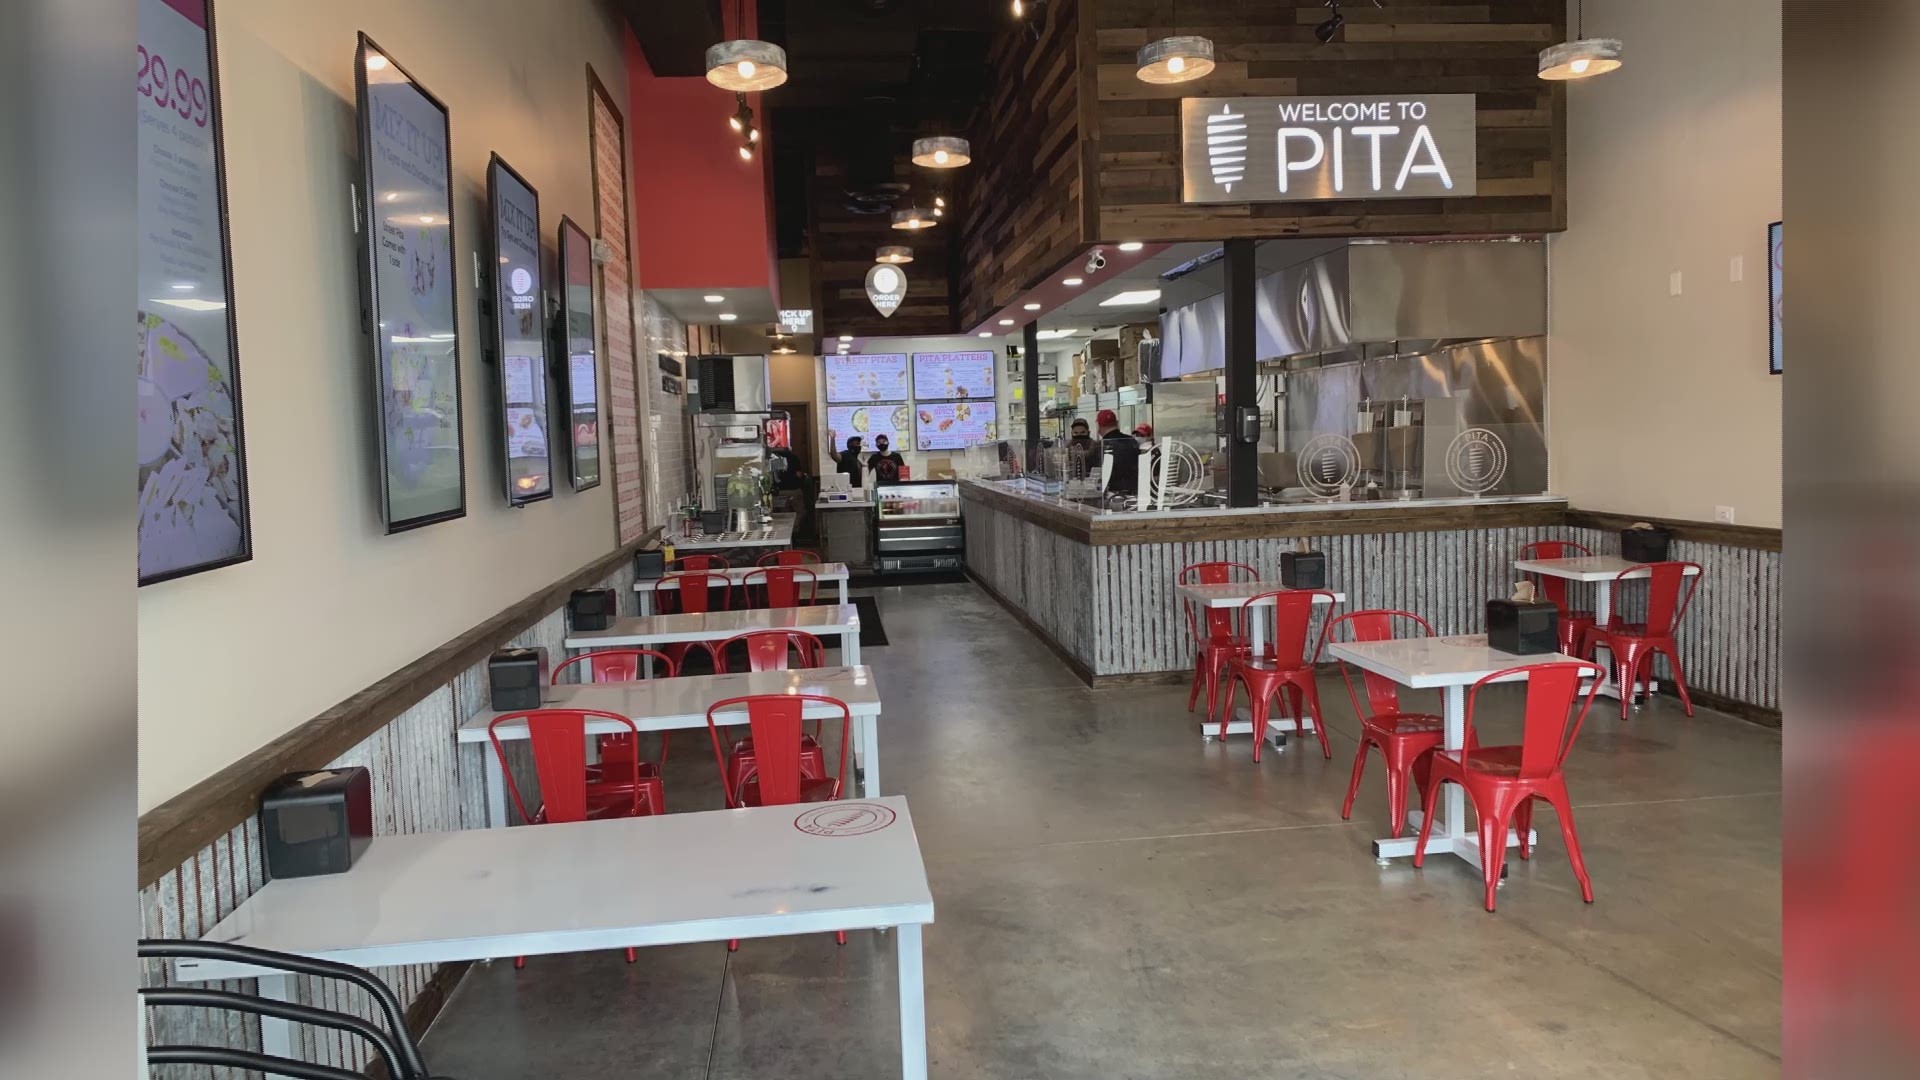 PITA Mediterranean street food serves many communities with over 35 locations, now you can find one in Macon.